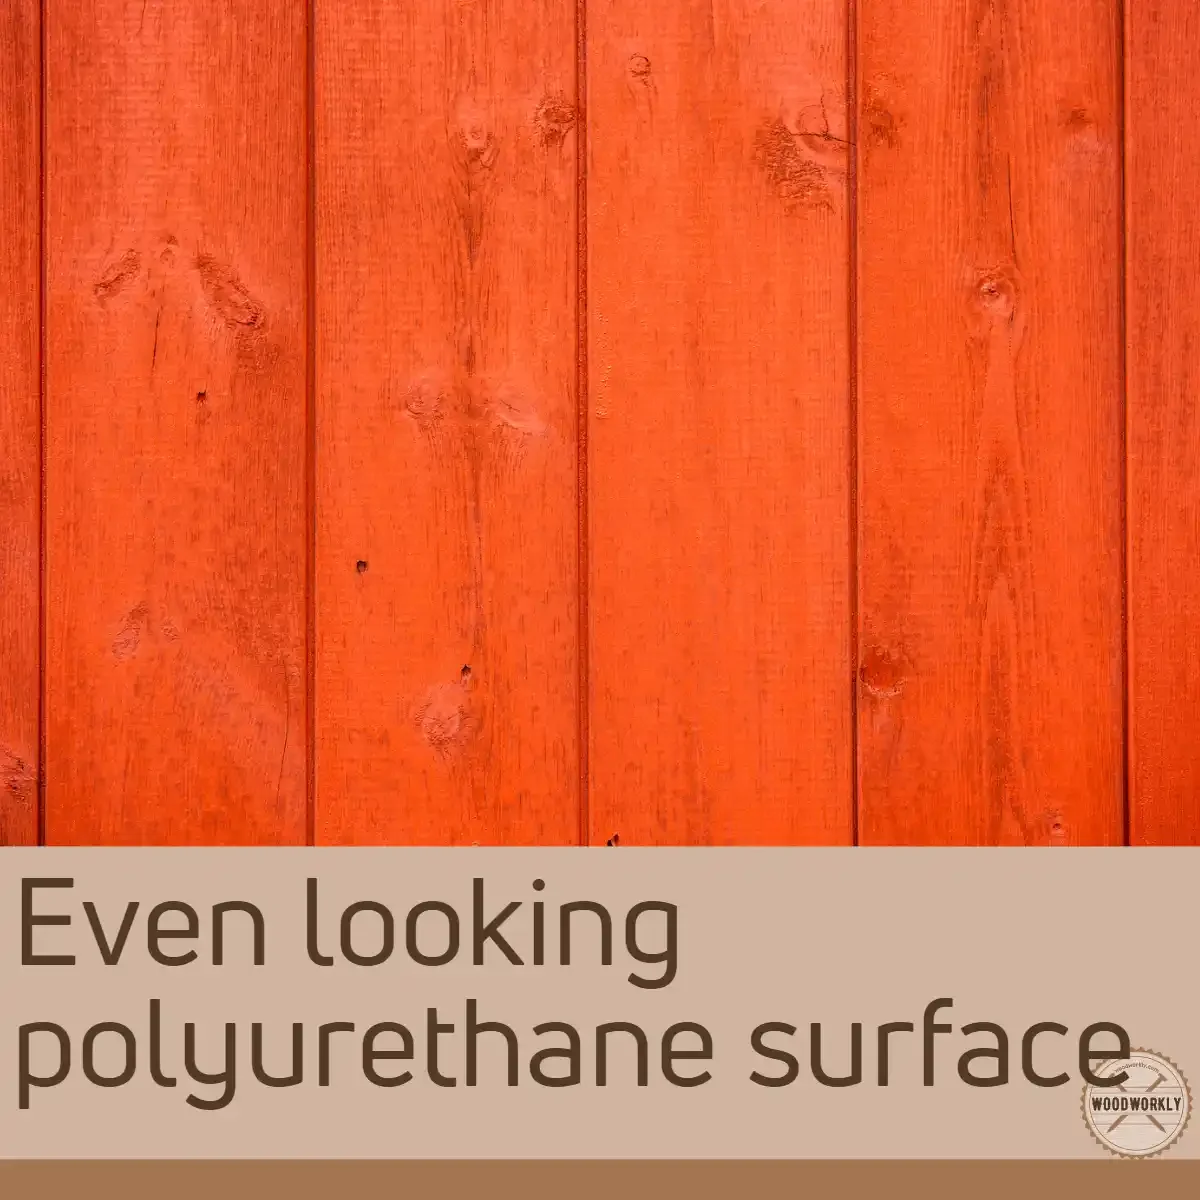 Even looking polyurethane surface